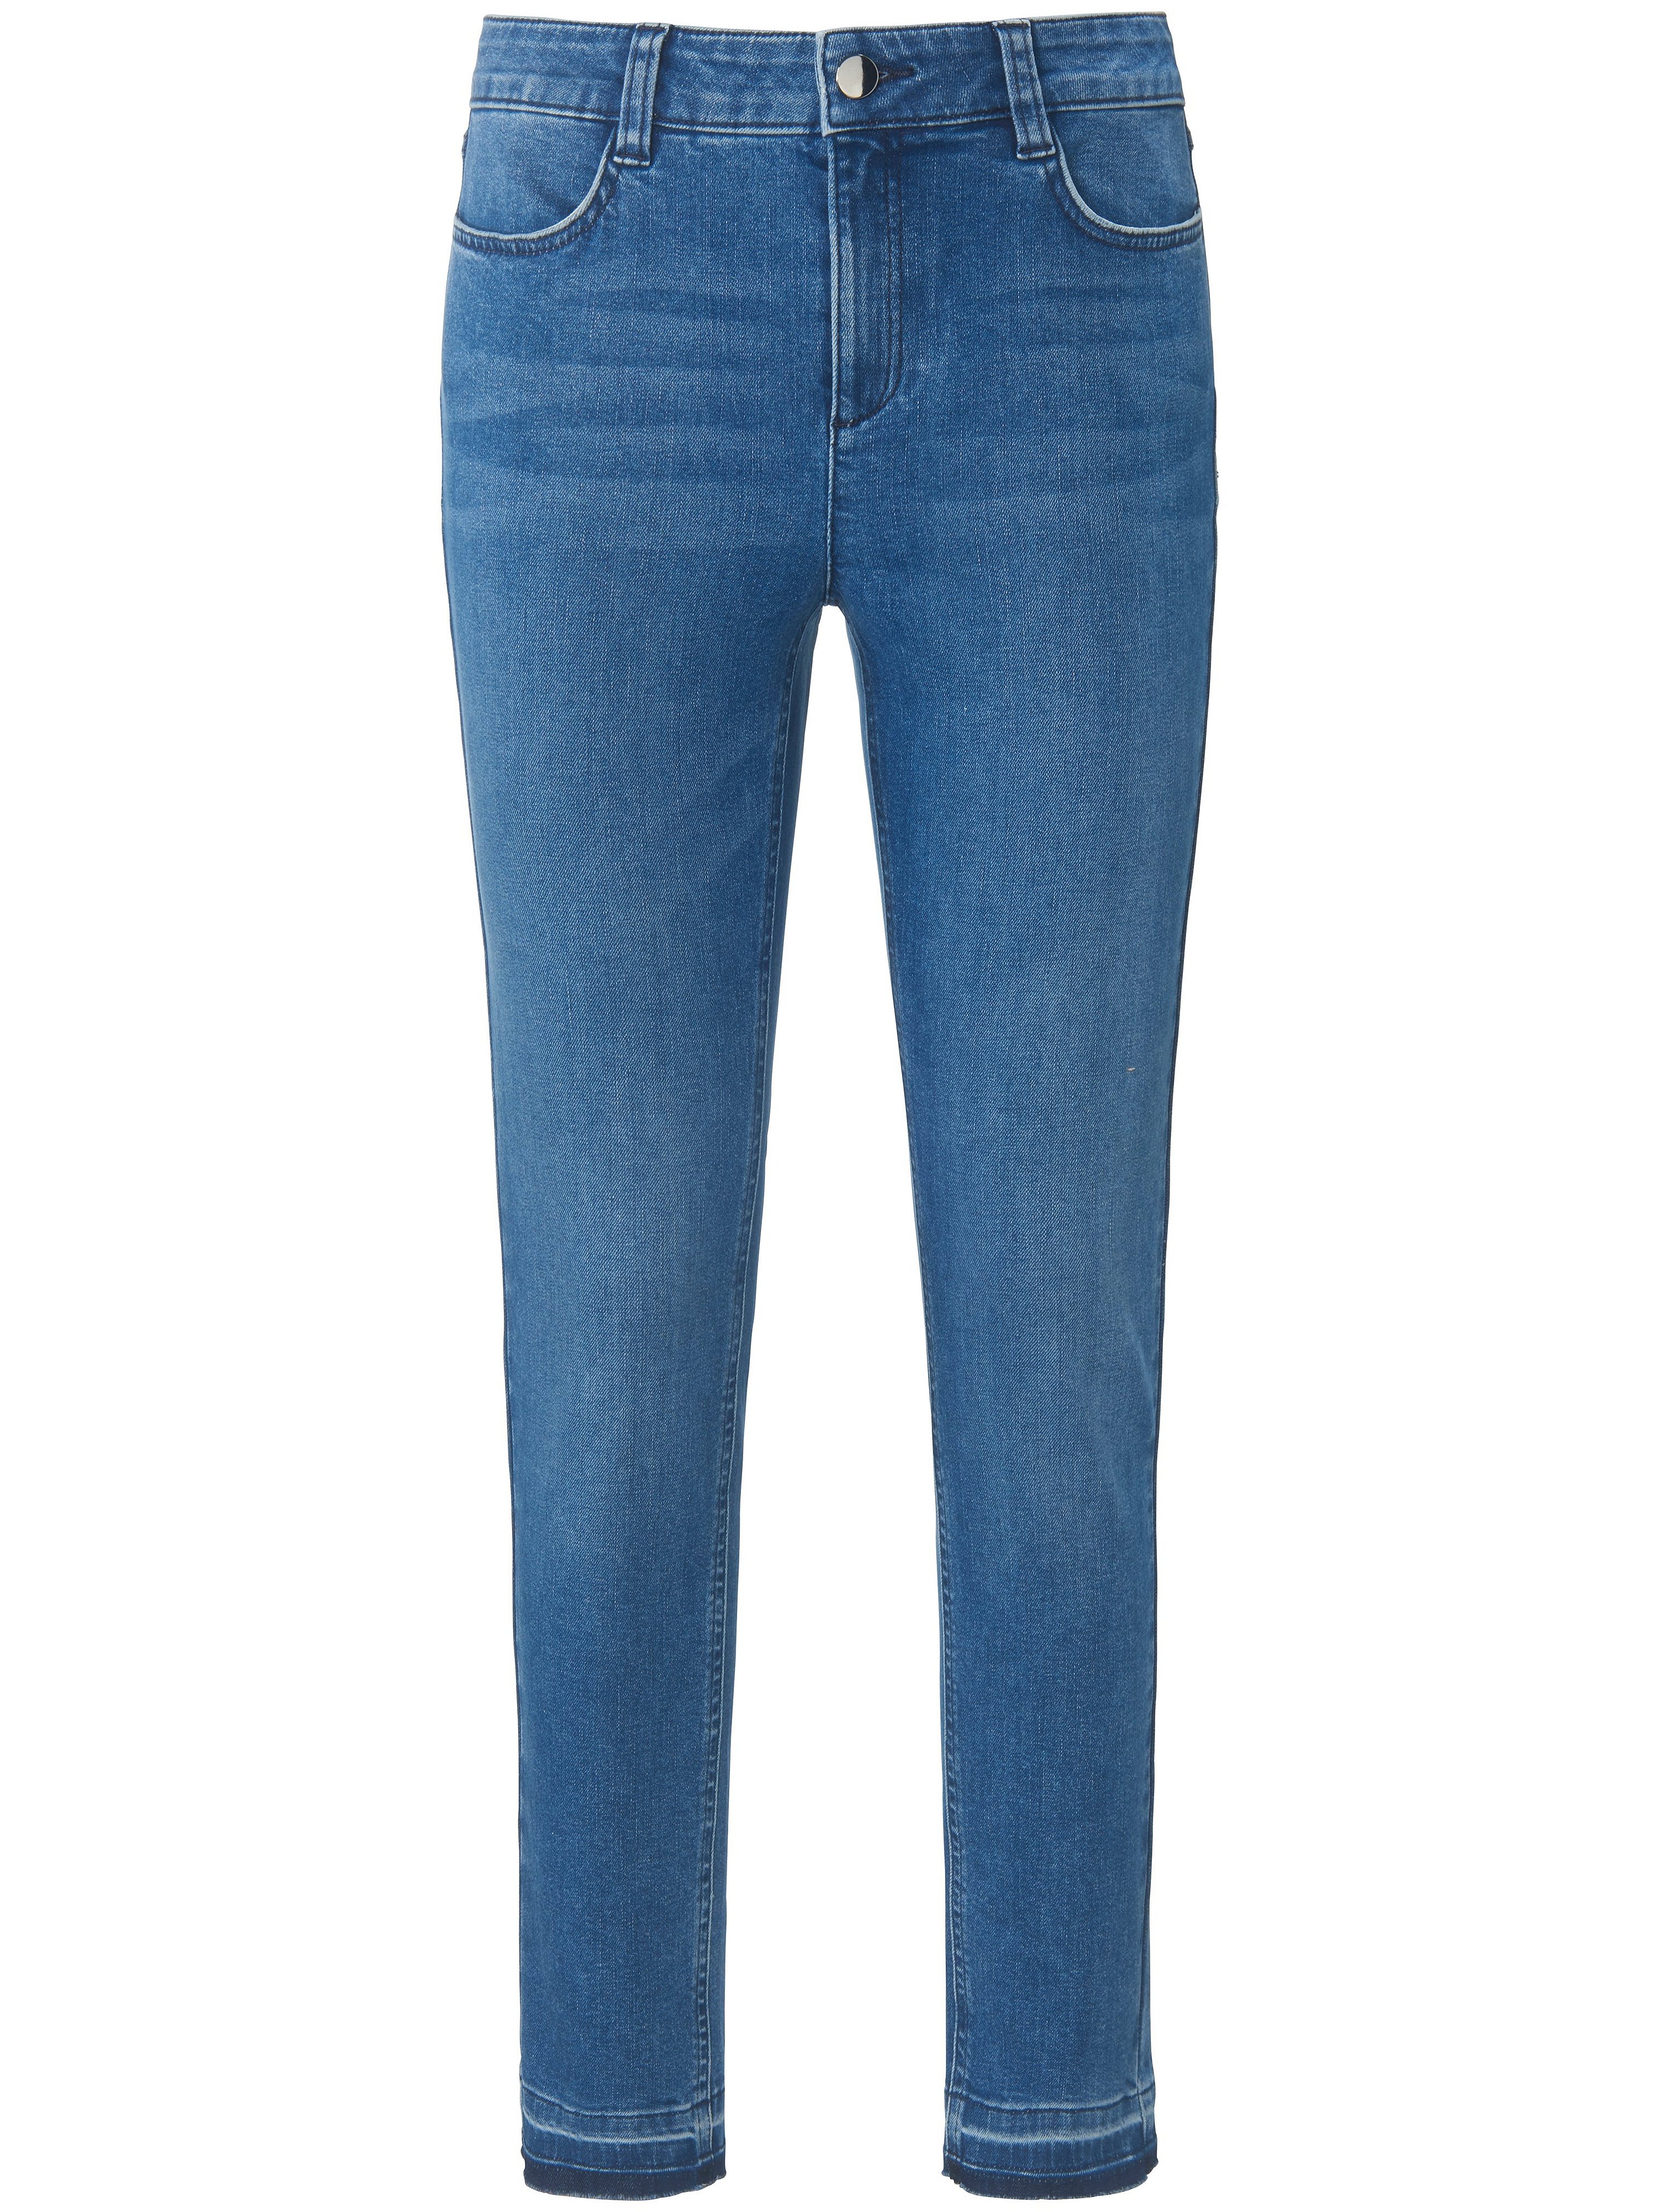 Le jean longueur chevilles Skinny Fit  DAY.LIKE denim taille 50